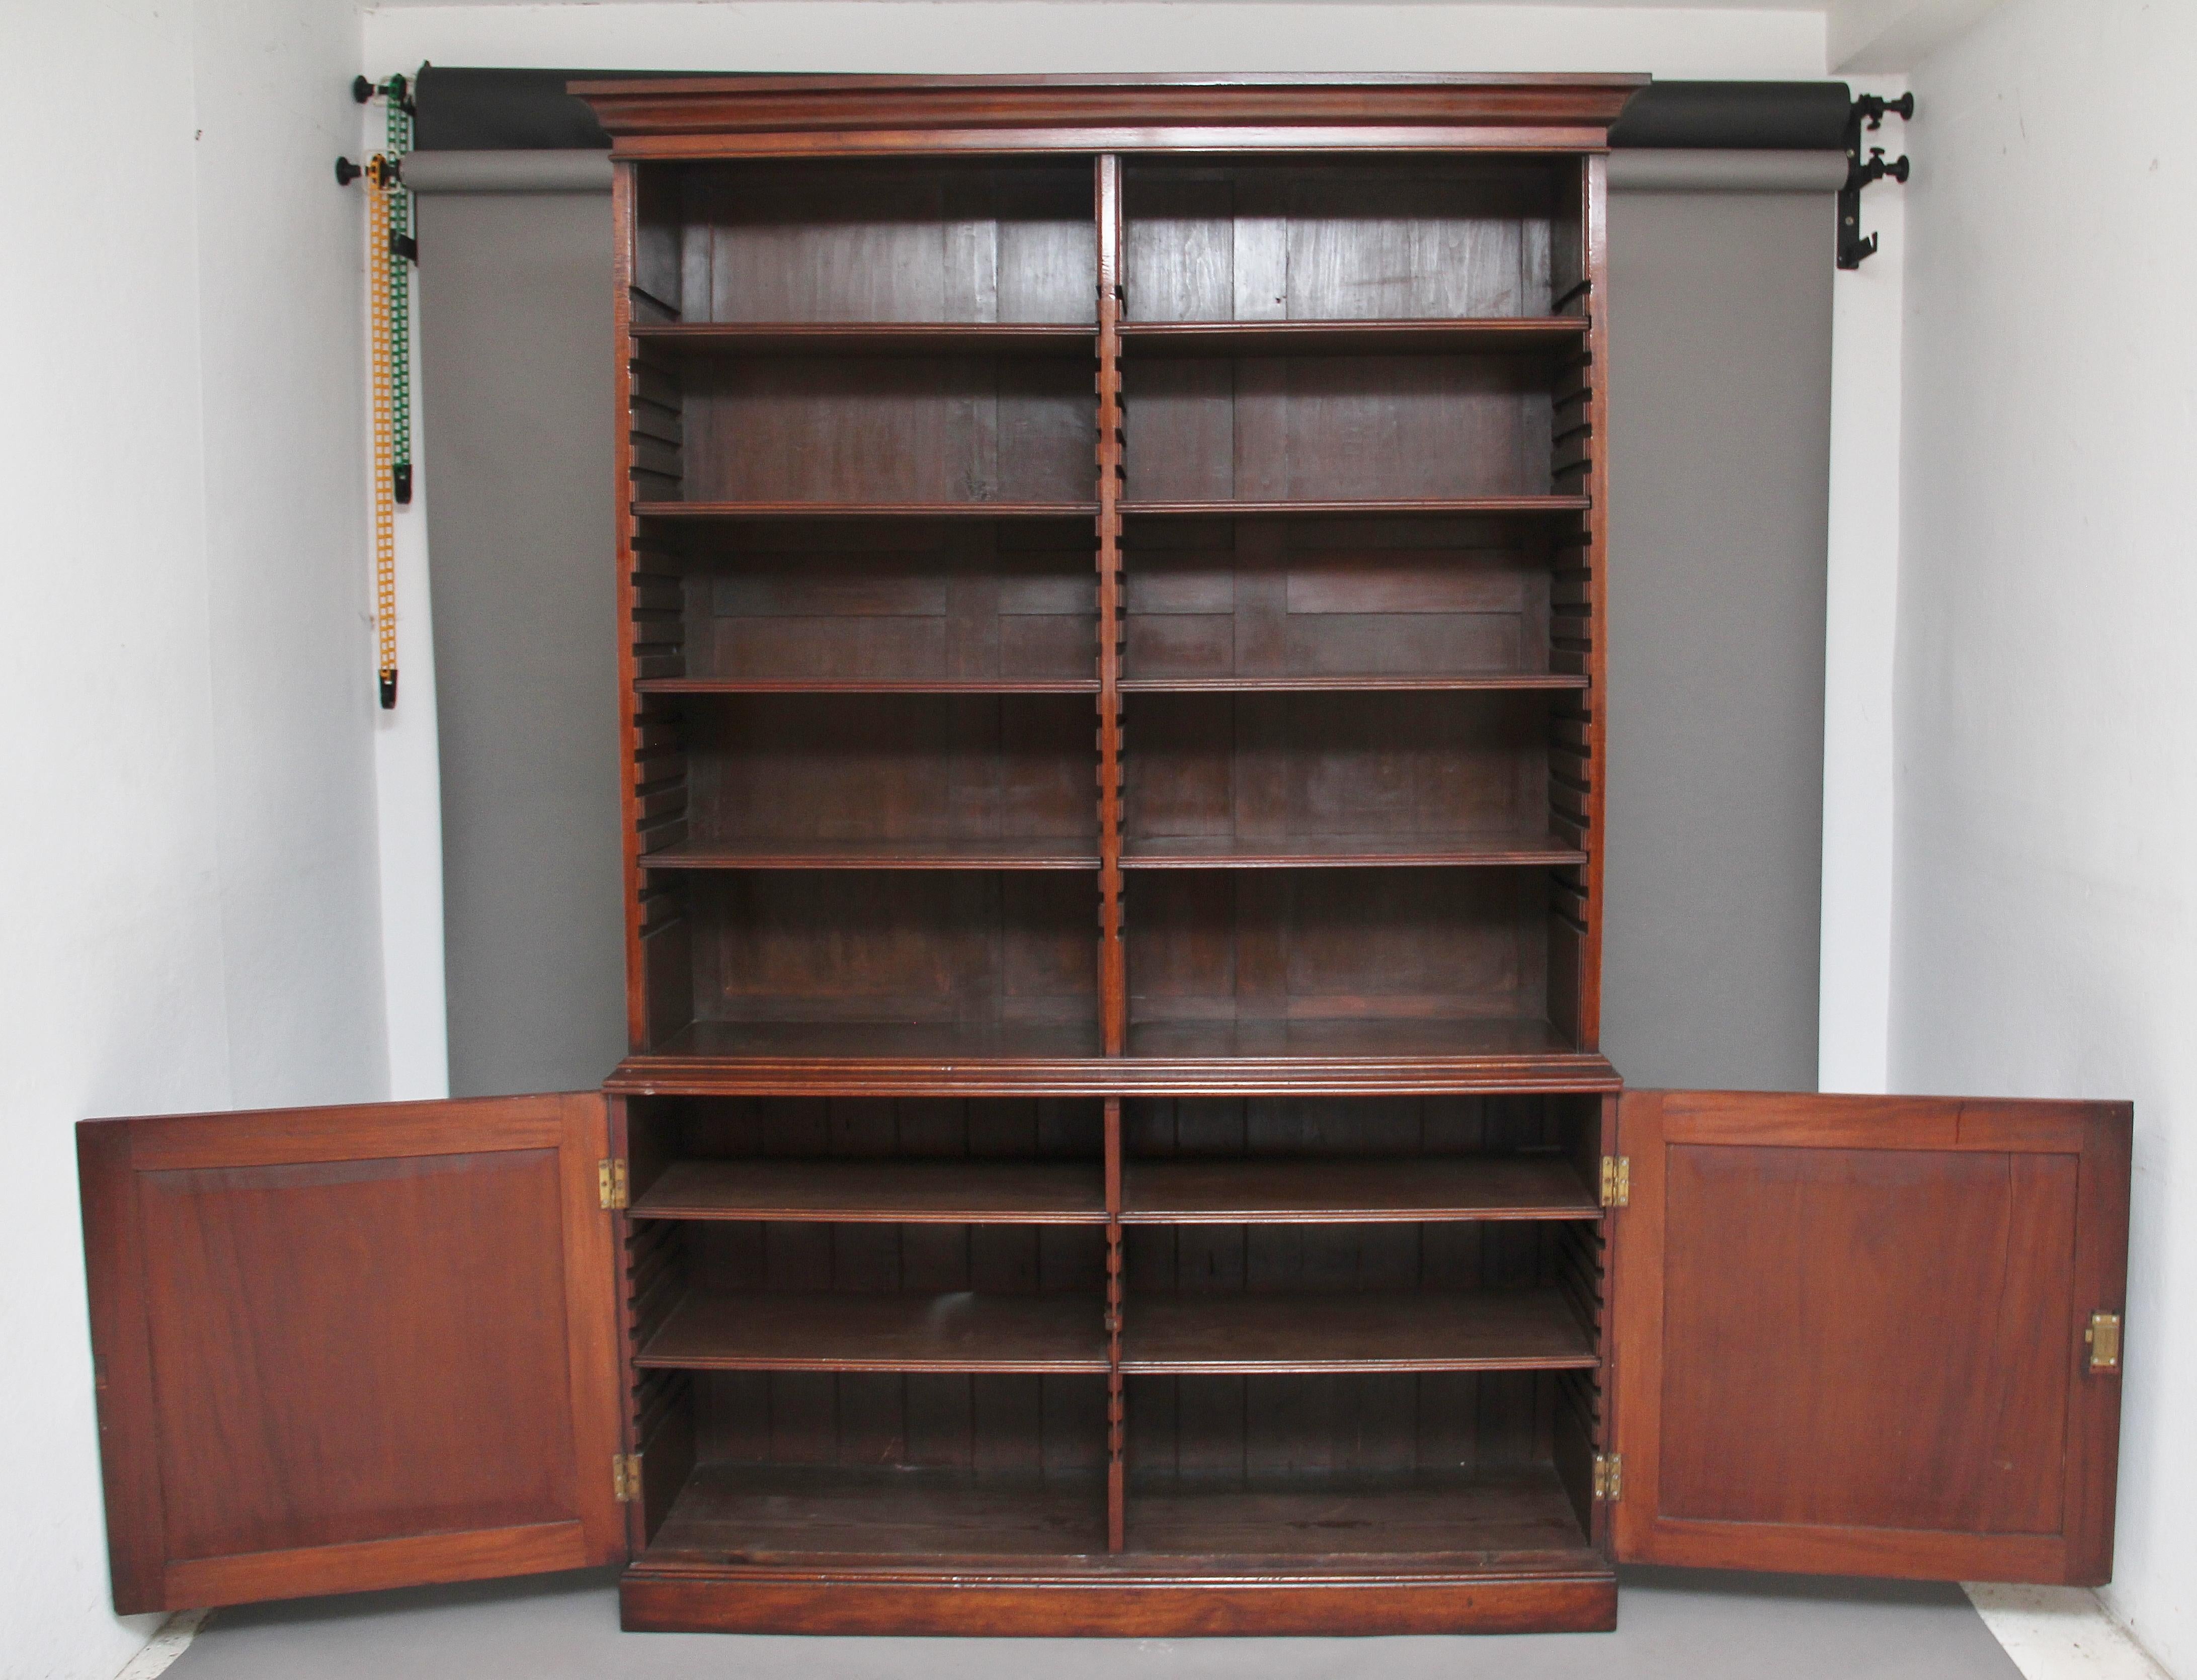 A large early 19th century mahogany open bookcase, the top section having a cornice above the bookcase divided into two sections, with each section having four adjustable shelves, the cupboard has two panelled doors with double D-moulding at the top